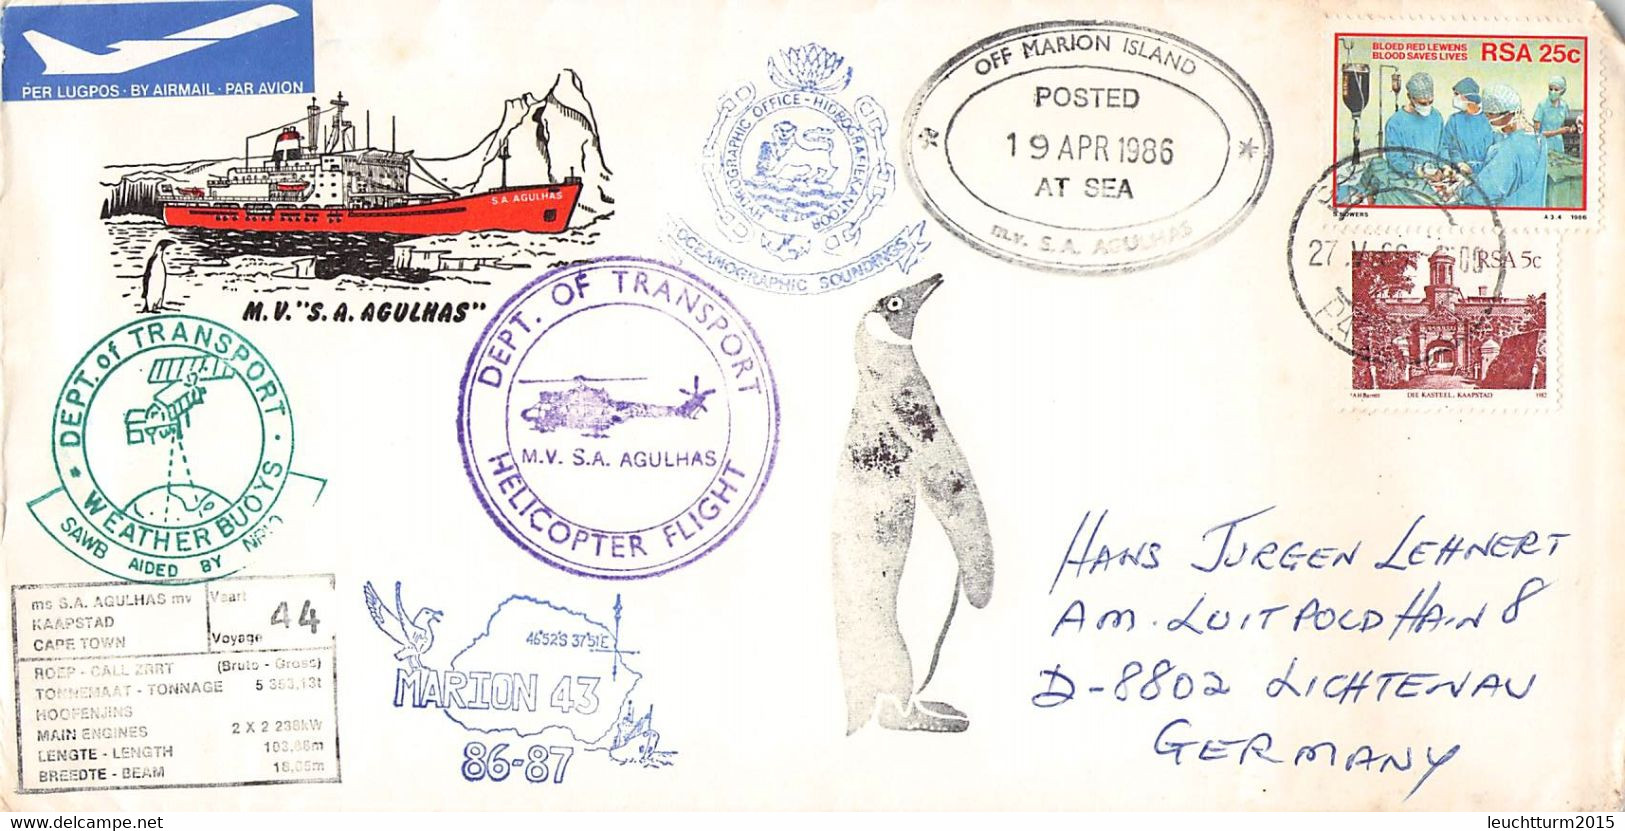 SOUTH AFRICA - POSTED AT SEA OFF MARION ISLAND 1986 / GR240 - Covers & Documents